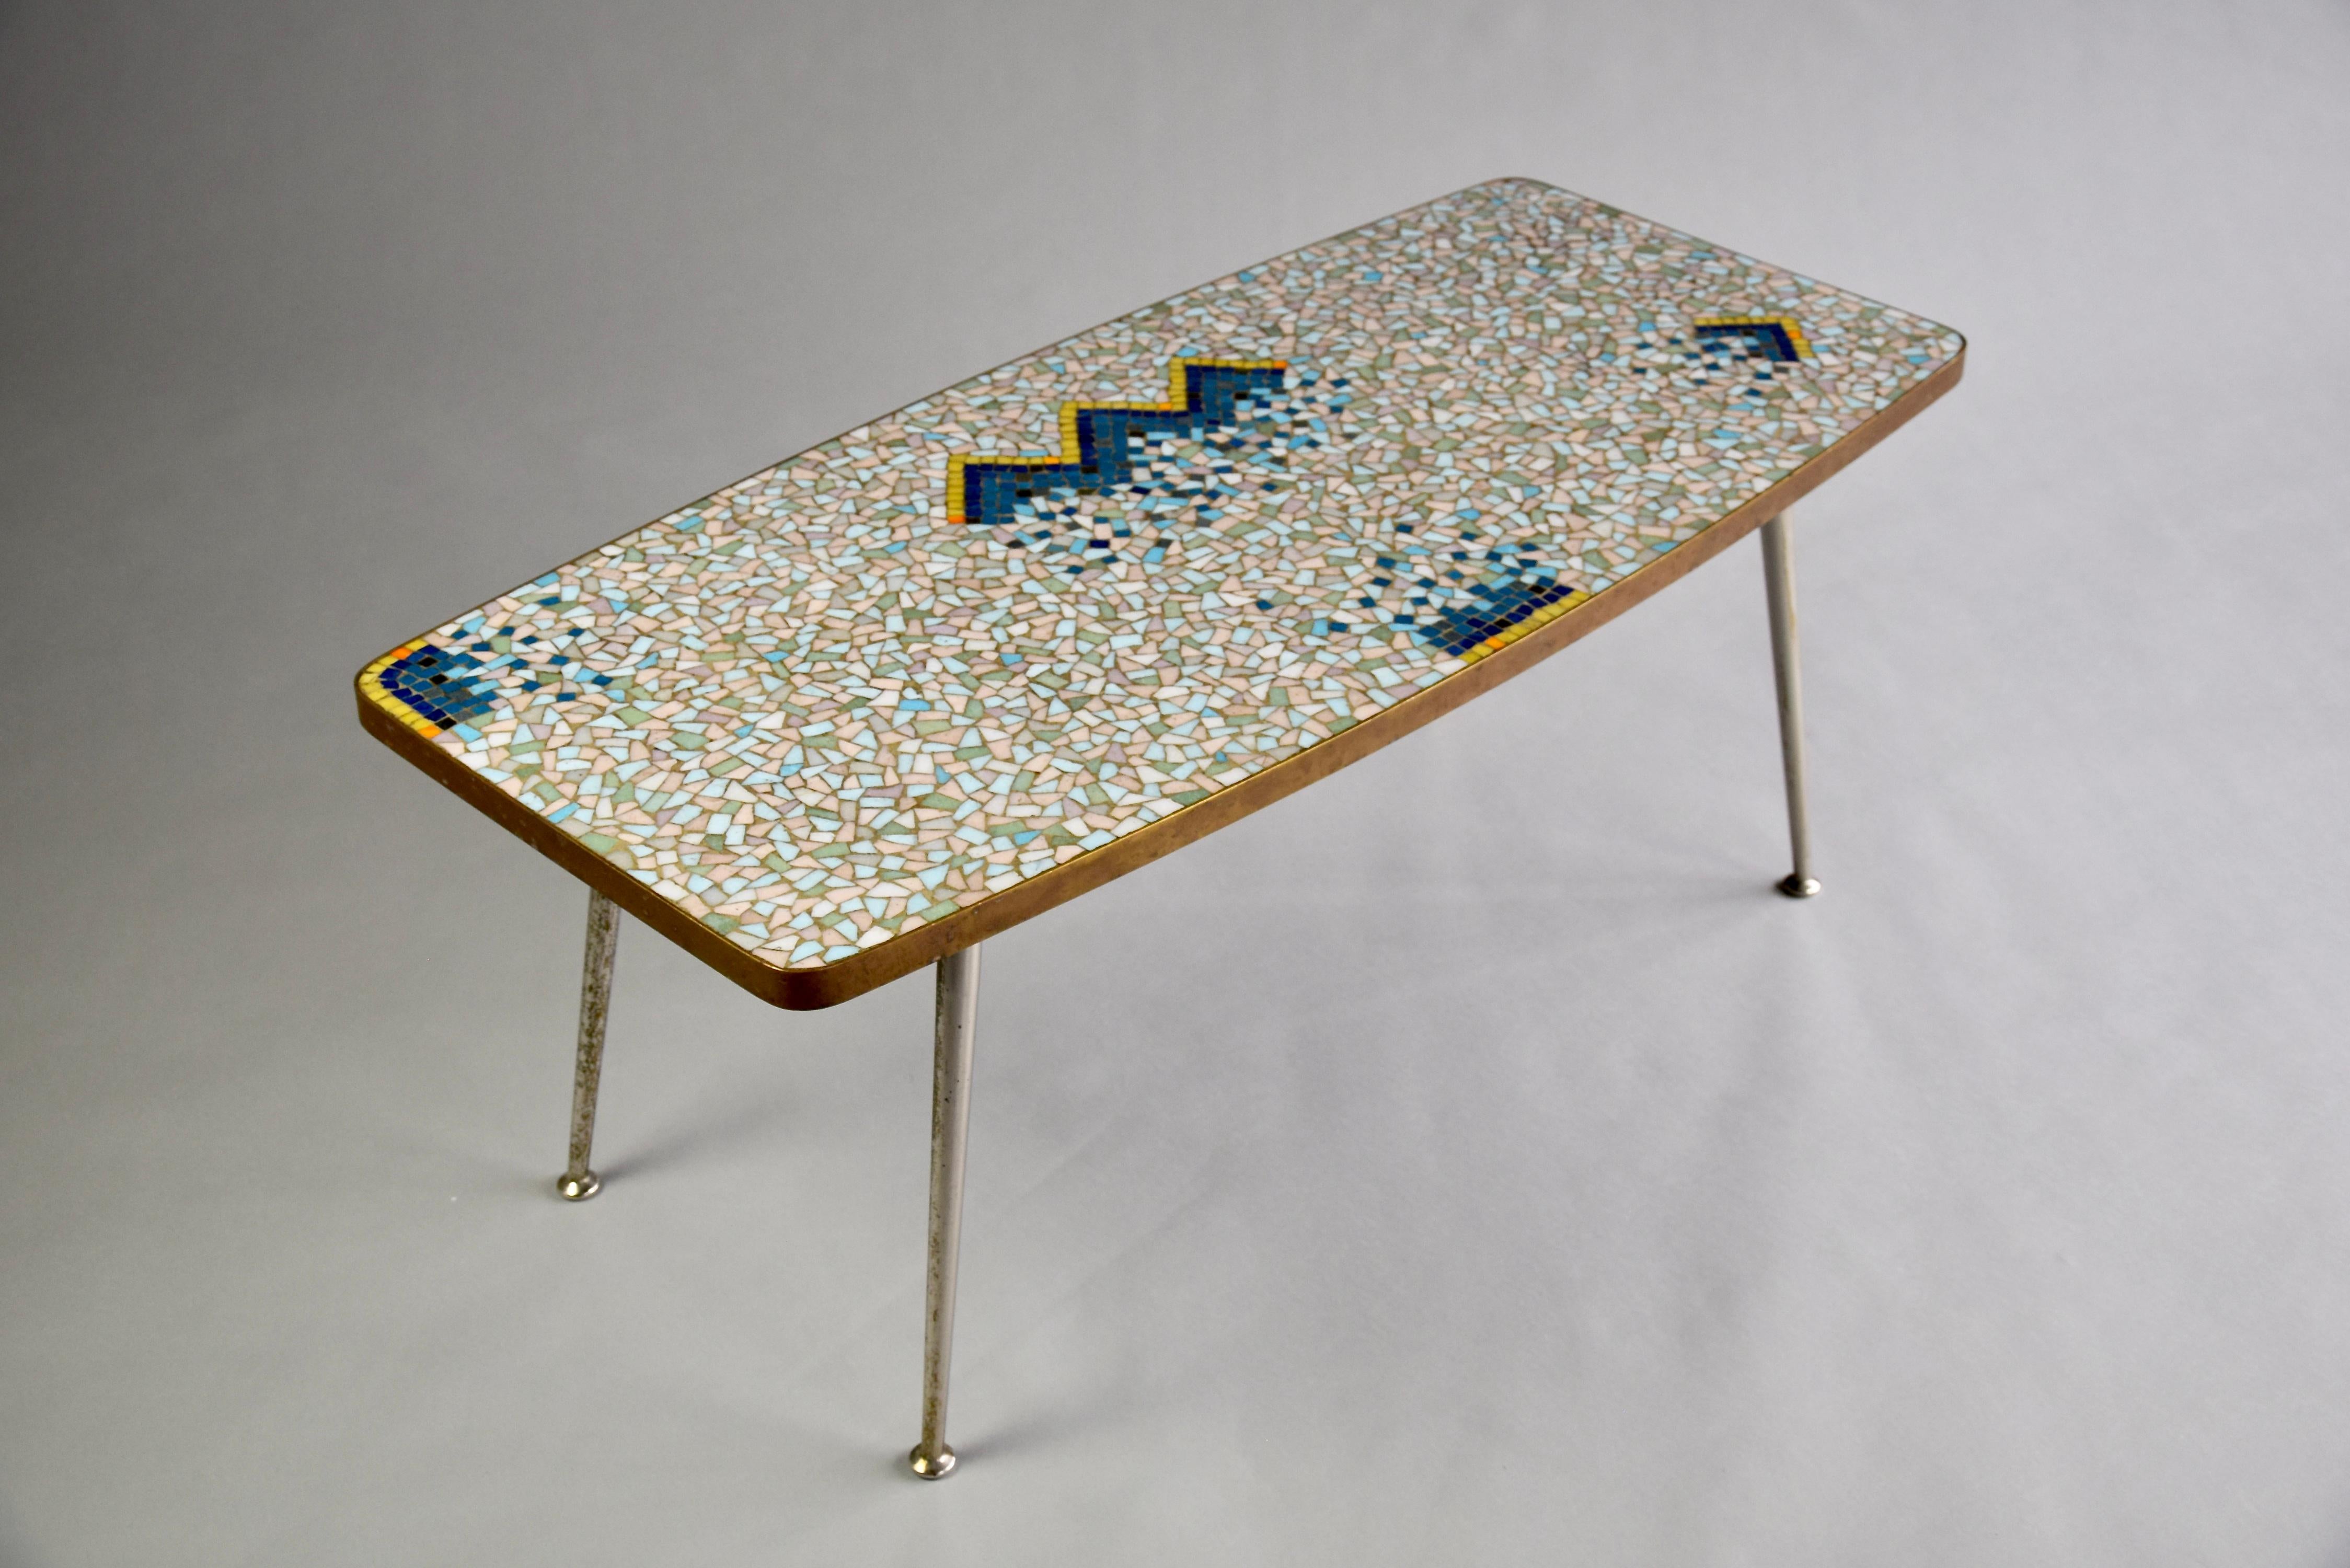 Colorful mosaic and brass coffee table by the artist Berthold Muller. All of Berthold Muller's creations are unique. The mosaic tiles are arrayed in a beautiful abstract design, reminiscent of modern art of the period. The table top is in great